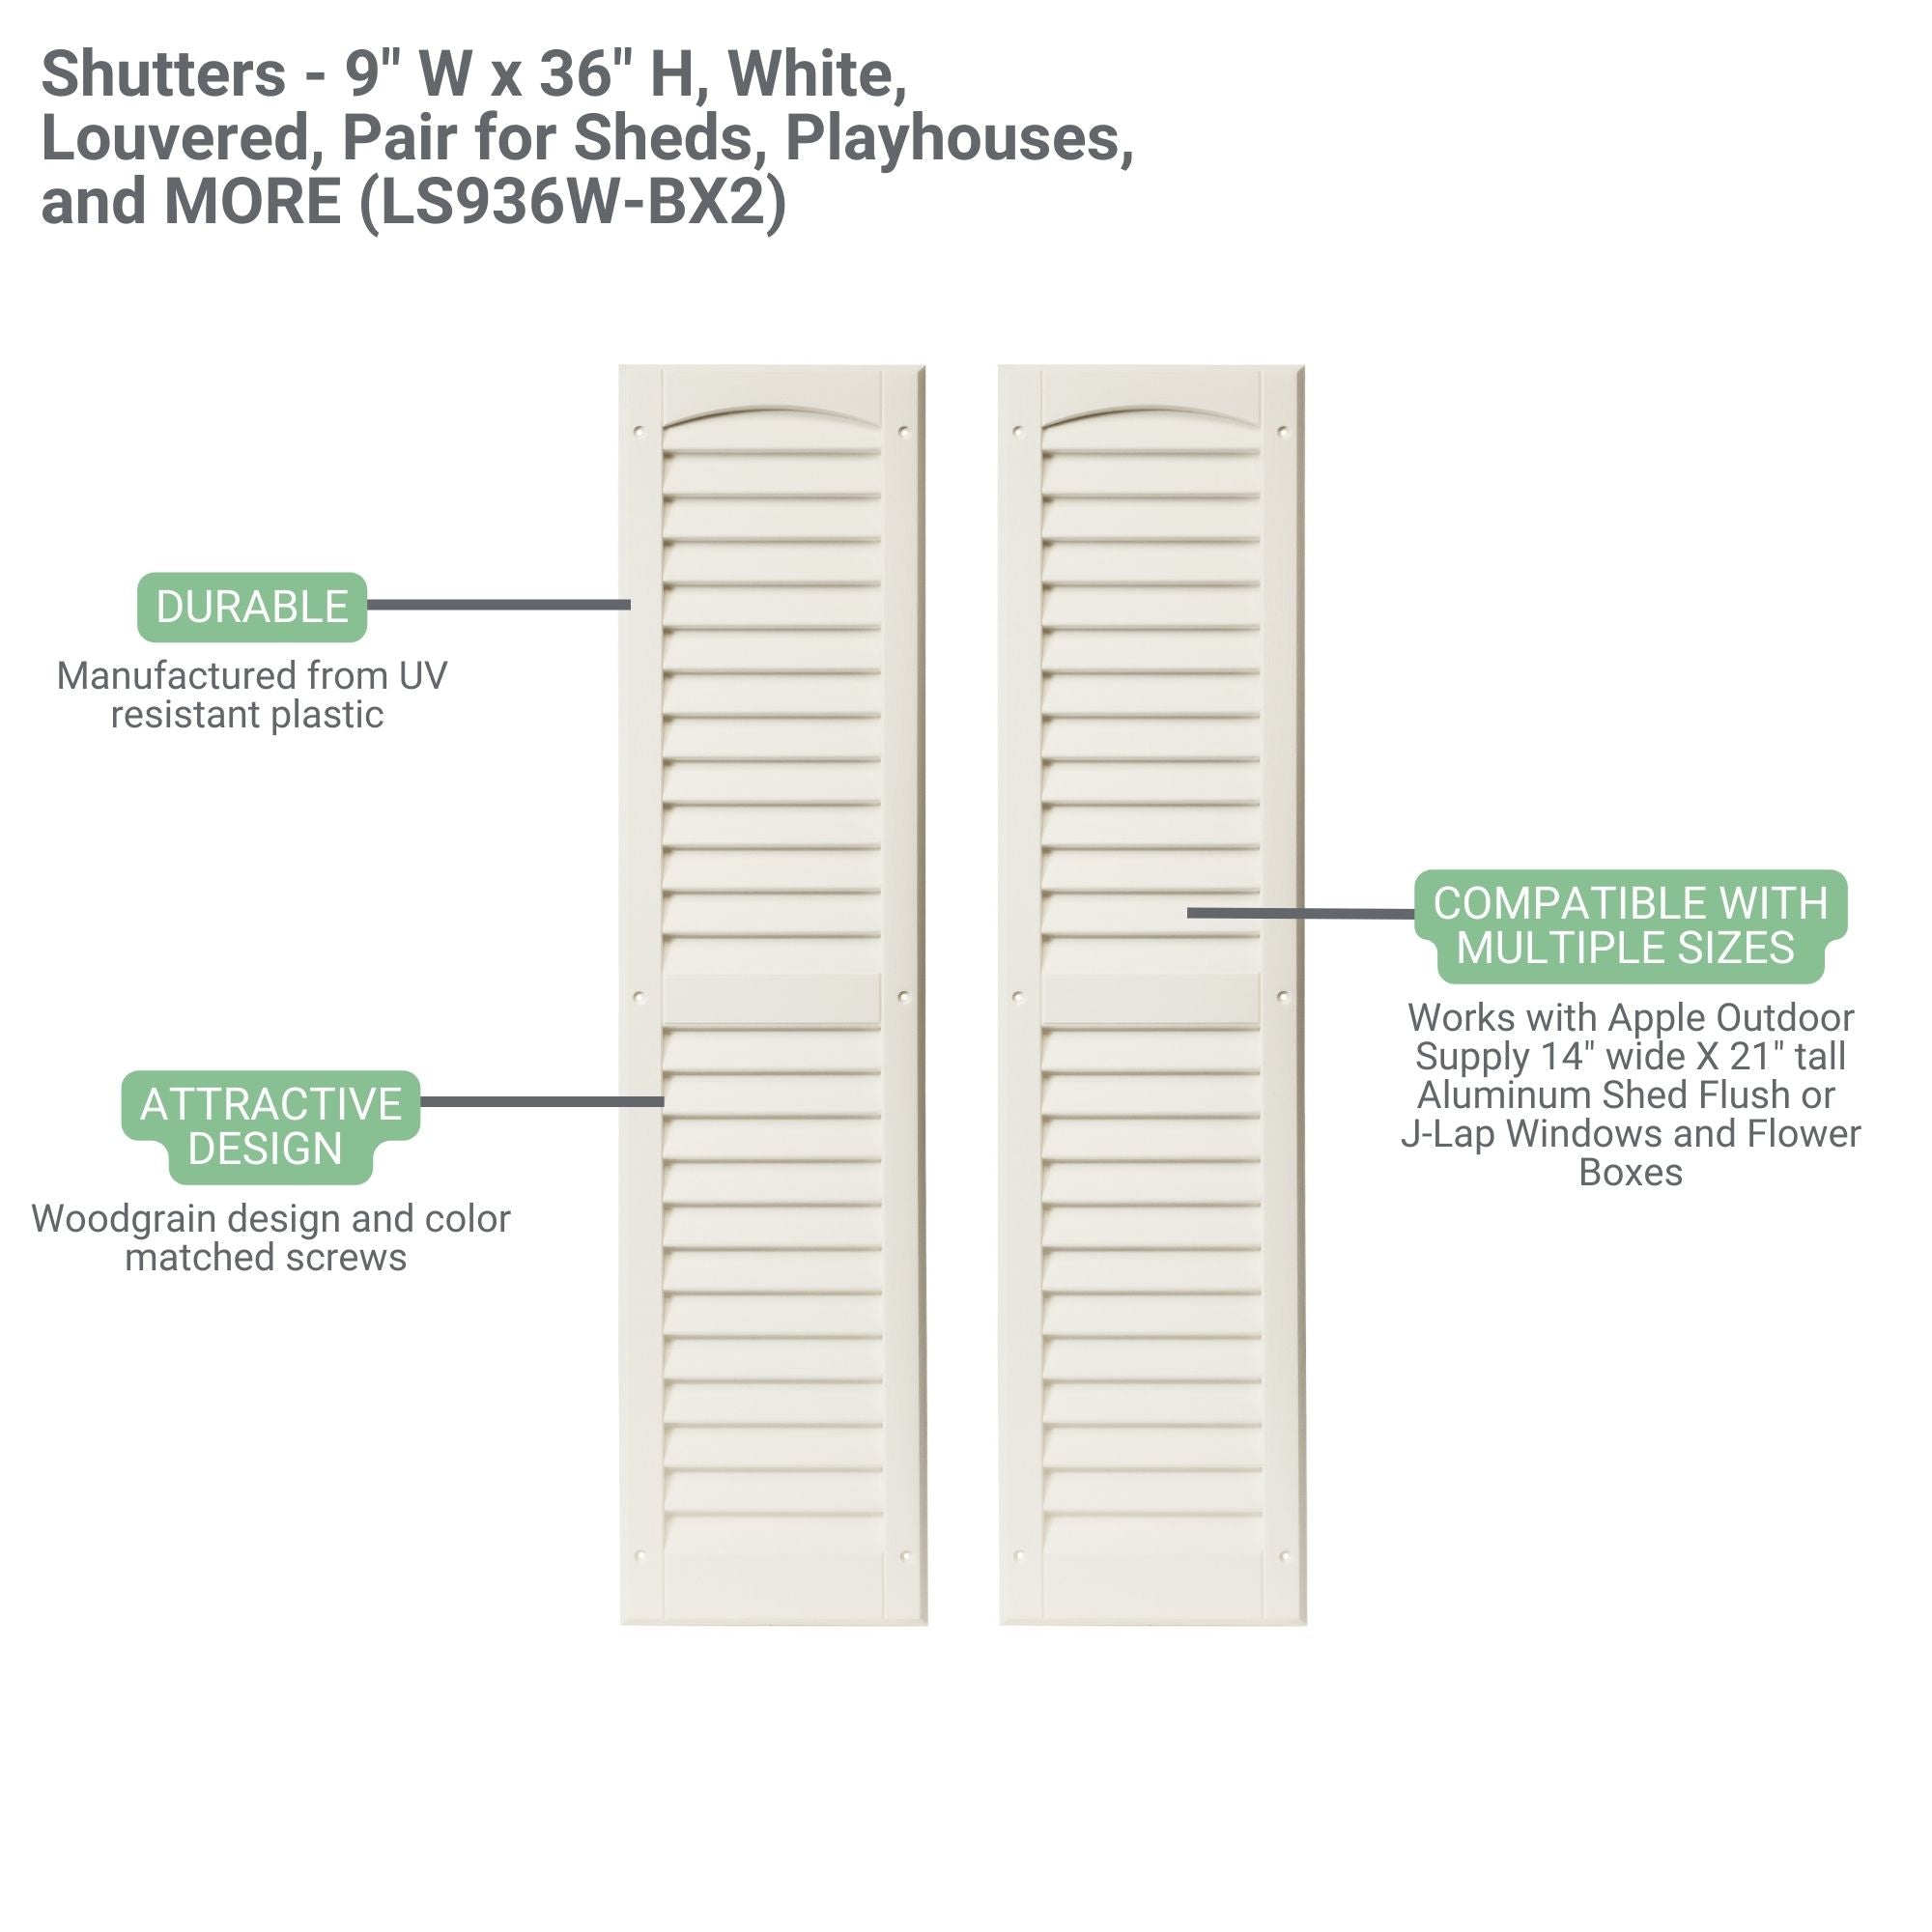 Shutters - 9" W x 36" H Louvered Shutters,  1 Pair